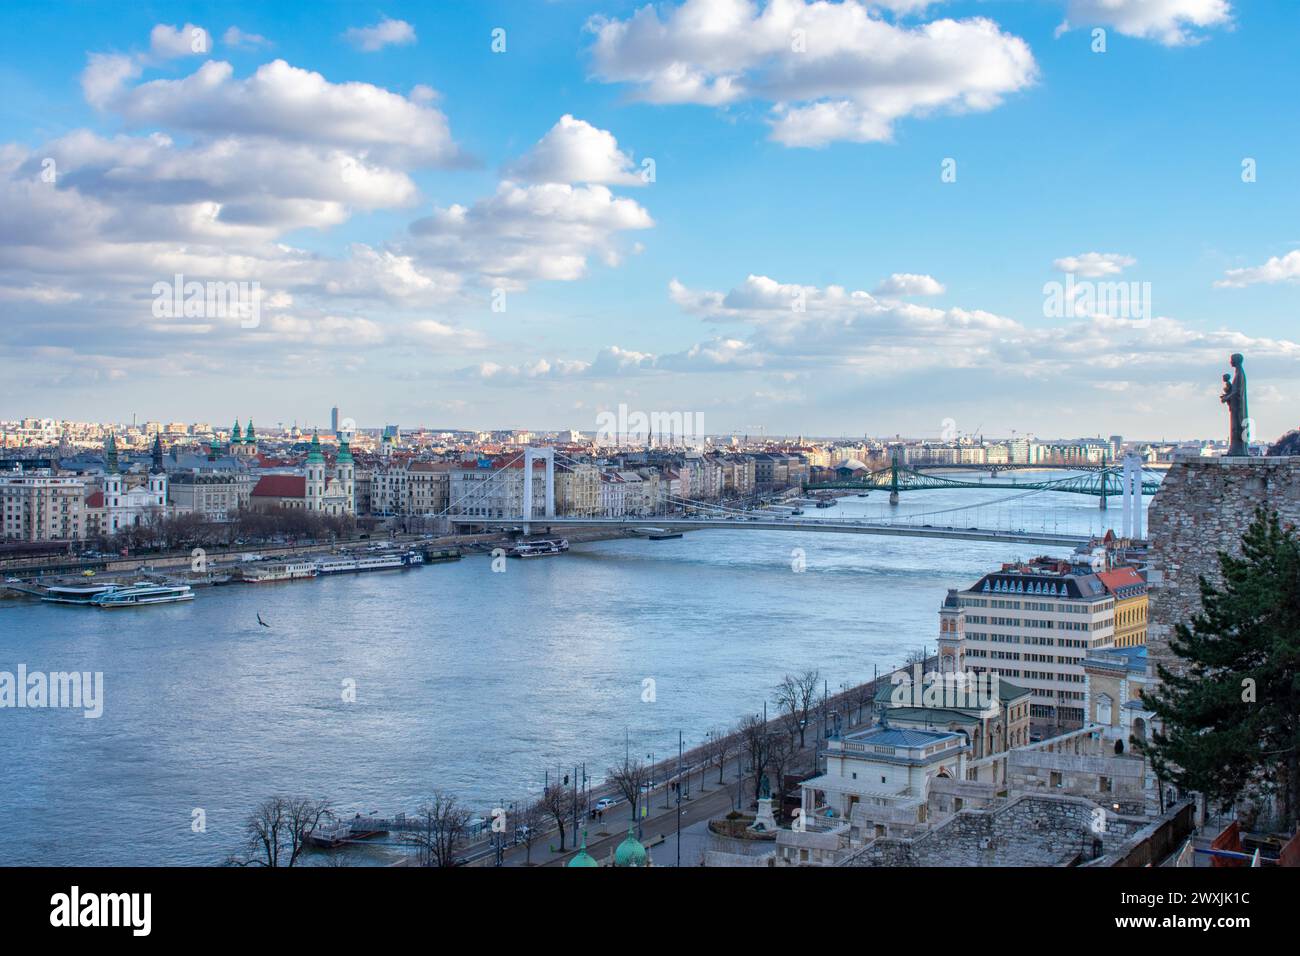 Aerial view on Danube River and buildings in City center of Budapest, Hungary. Drone photo, high angle view of town Stock Photo